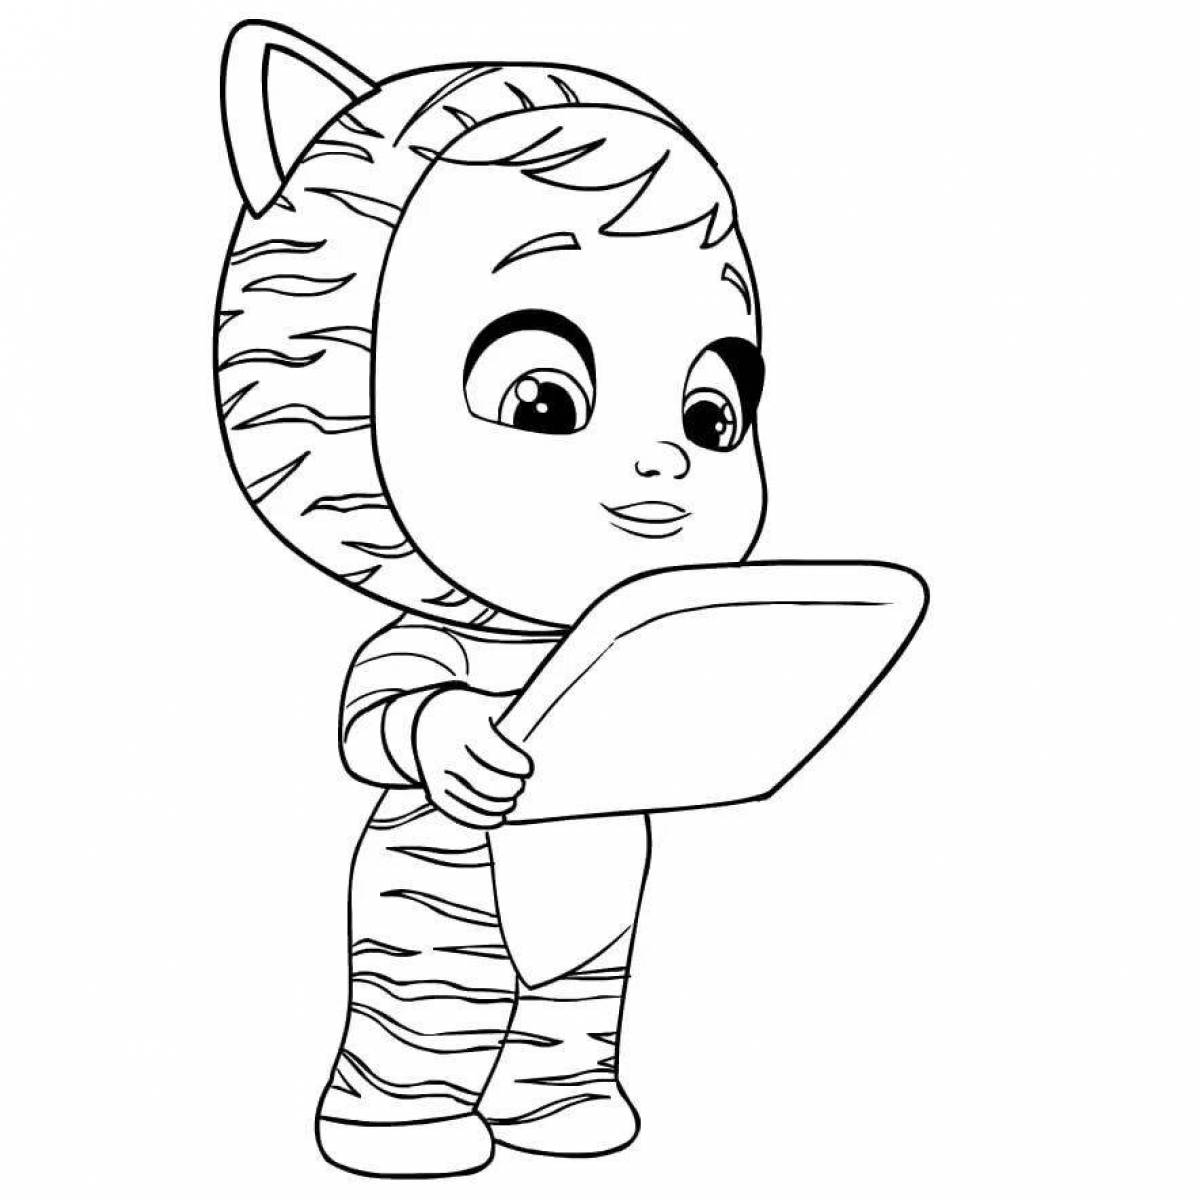 Exquisite crybaby coloring book